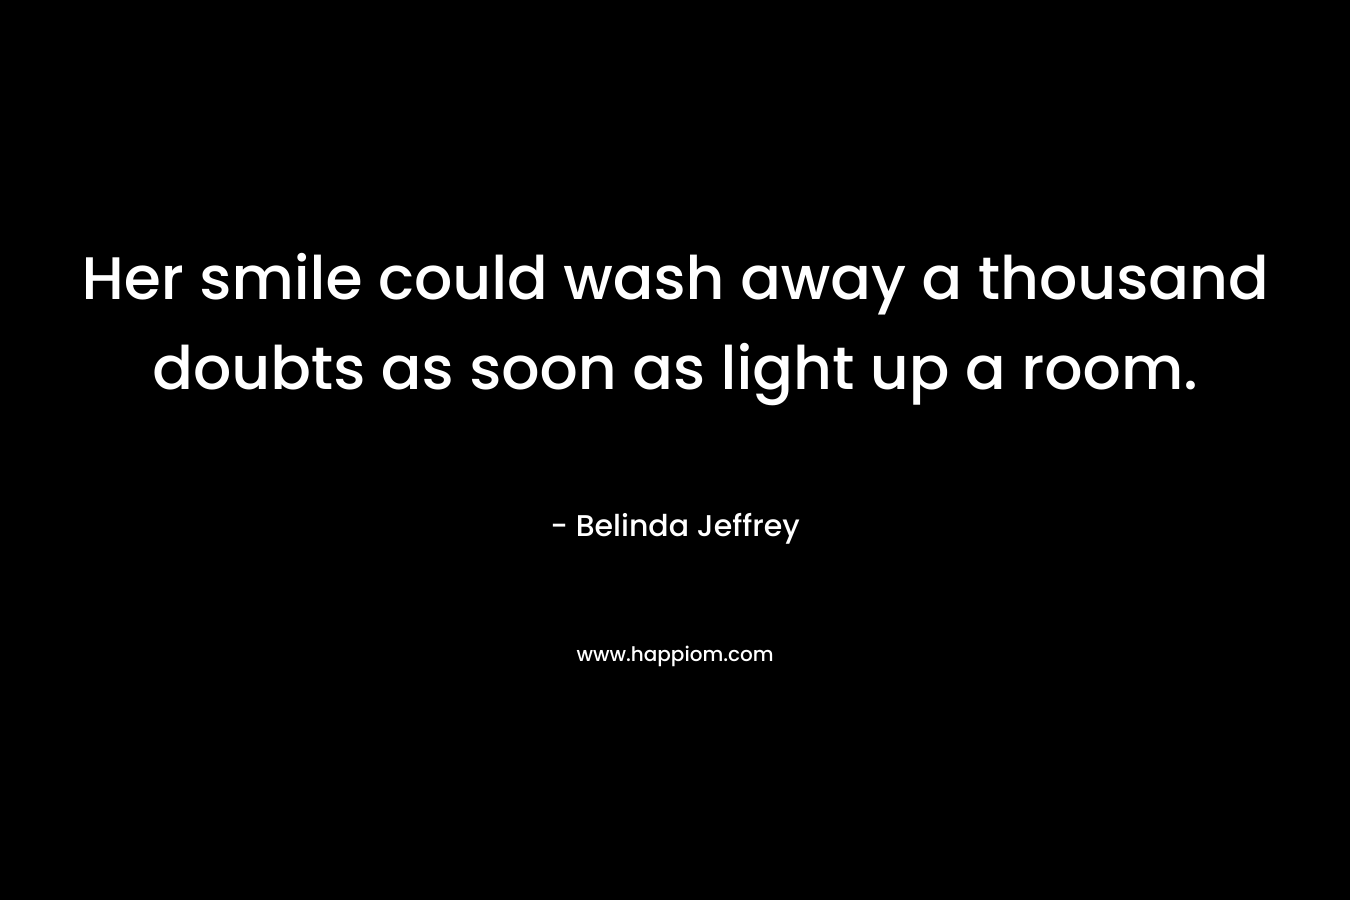 Her smile could wash away a thousand doubts as soon as light up a room. – Belinda Jeffrey